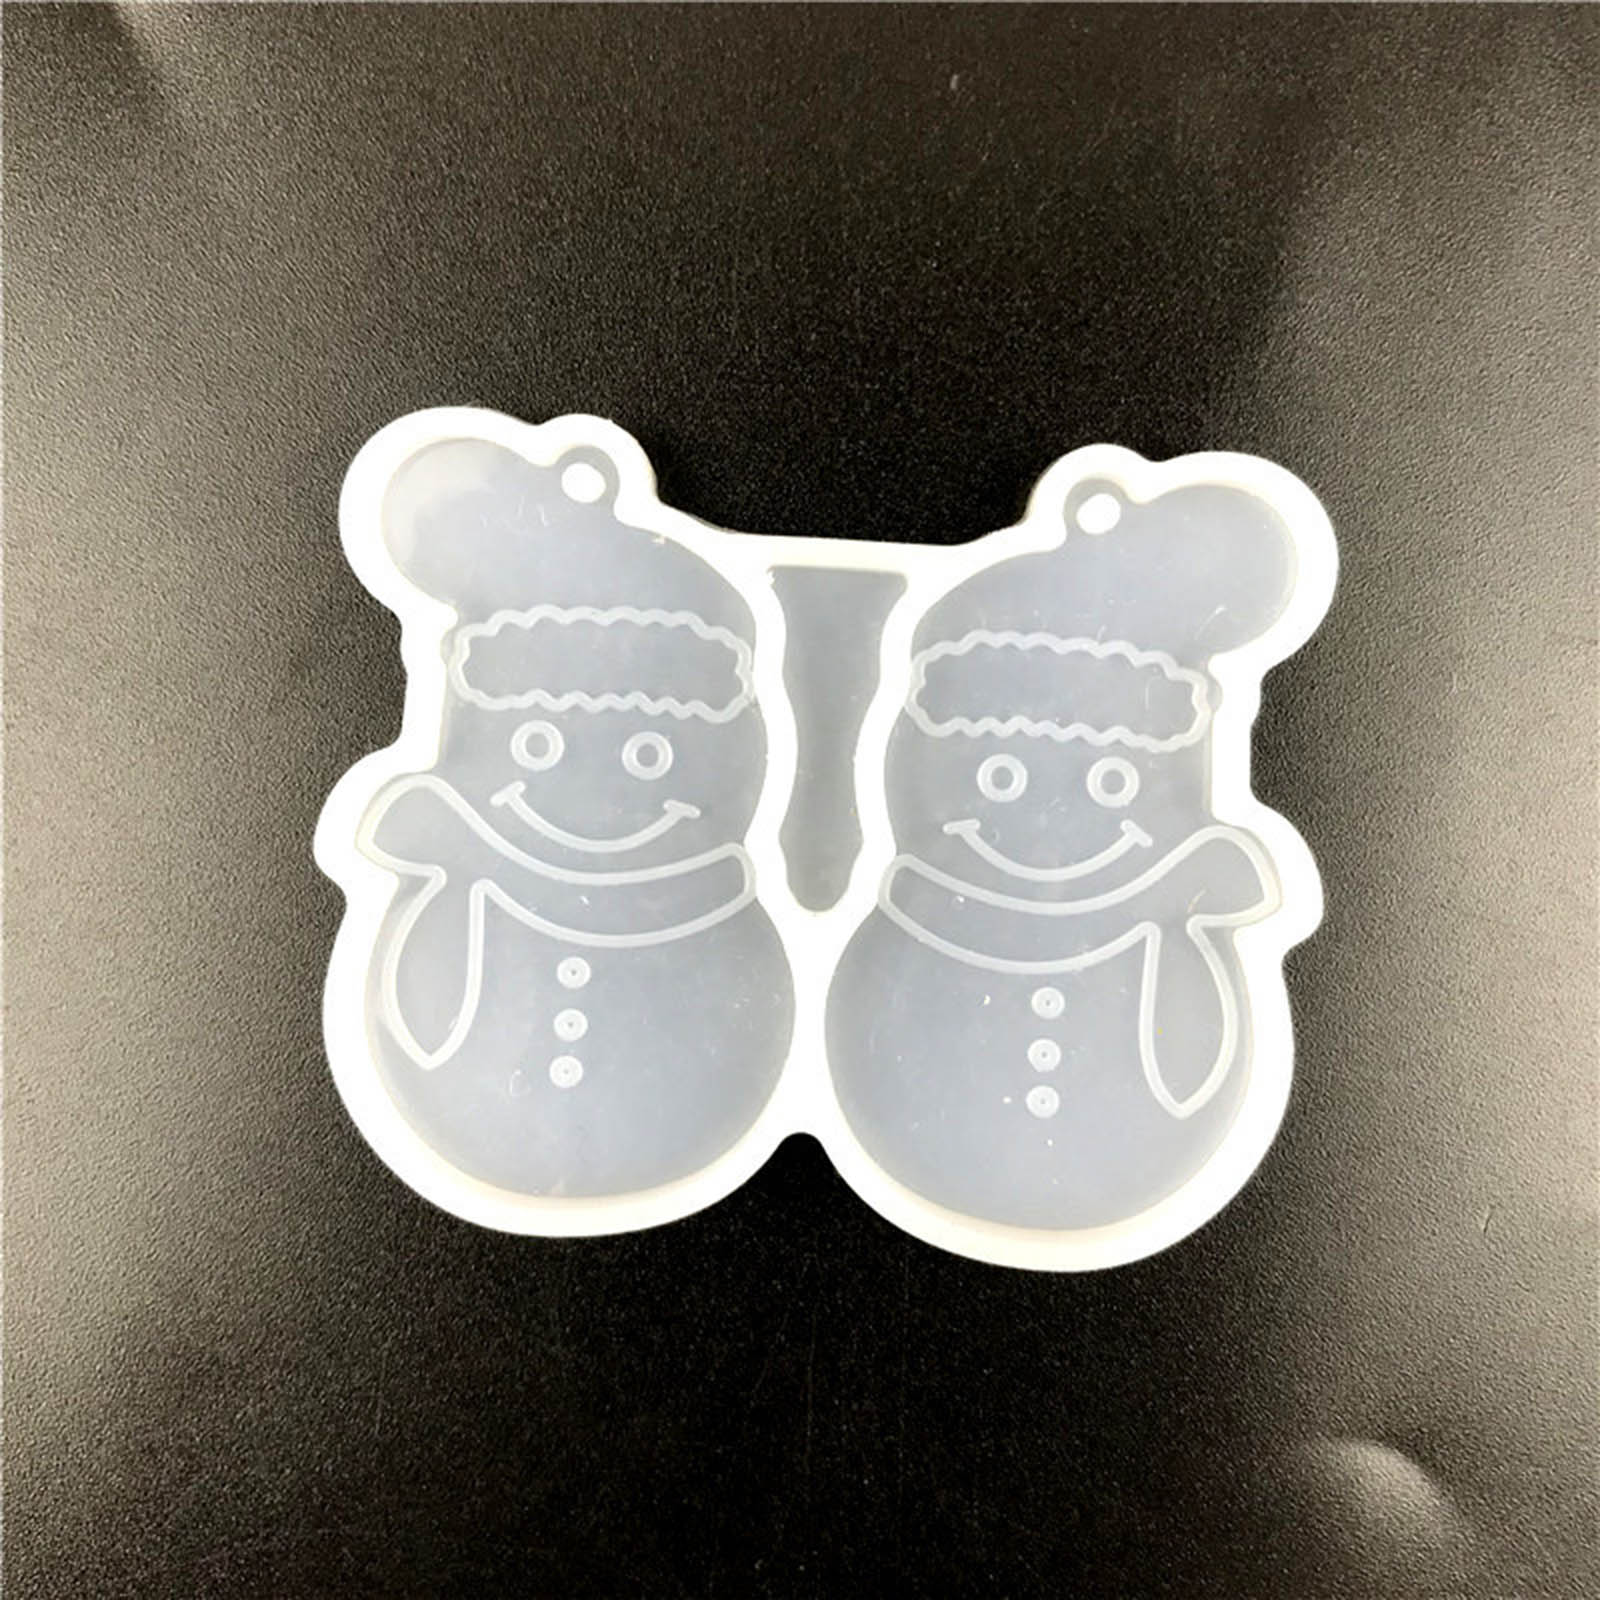 Picture of Silicone Resin Mold For Jewelry Making Earring Pendant Christmas Snowman White 5.2cm x 4.2cm, 1 Piece